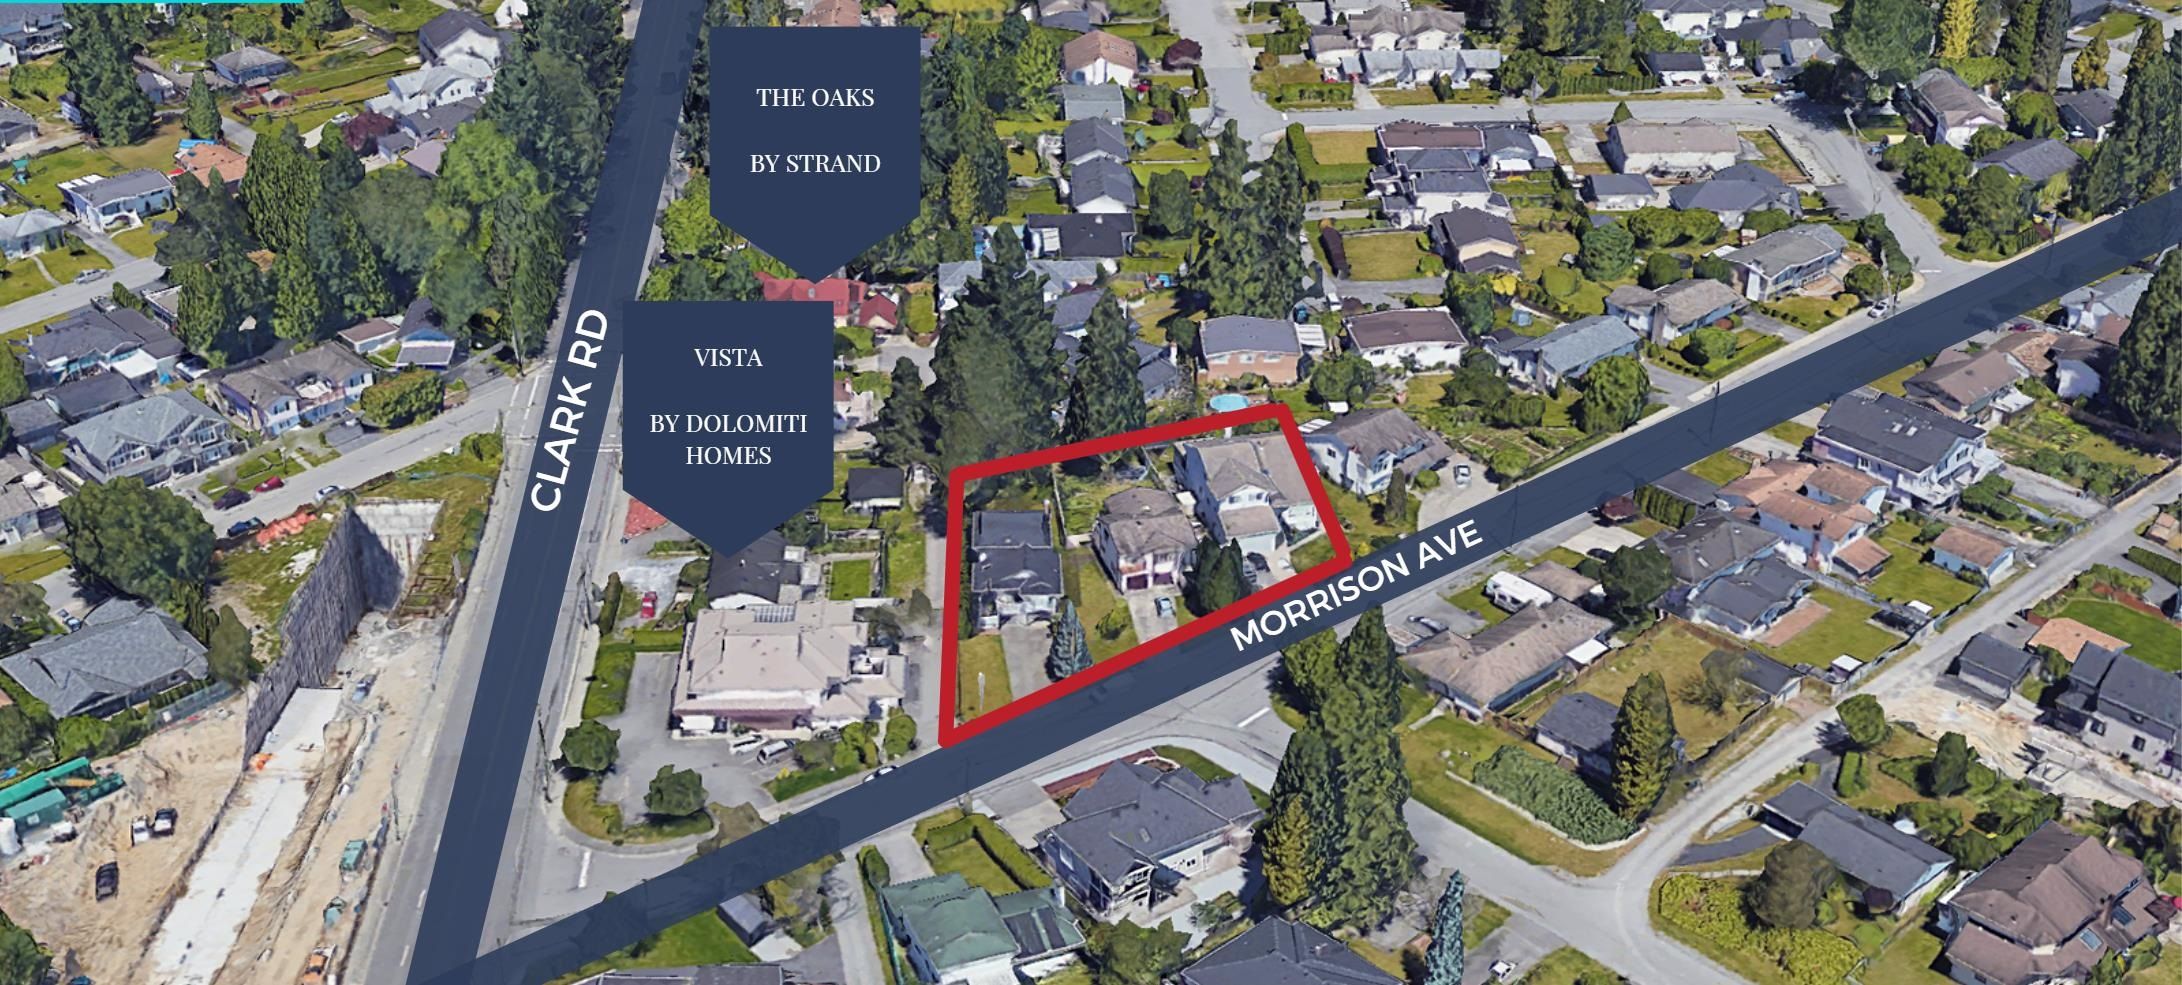 Main Photo: 663 MORRISON Avenue in Coquitlam: Coquitlam West Land Commercial for sale : MLS®# C8042123